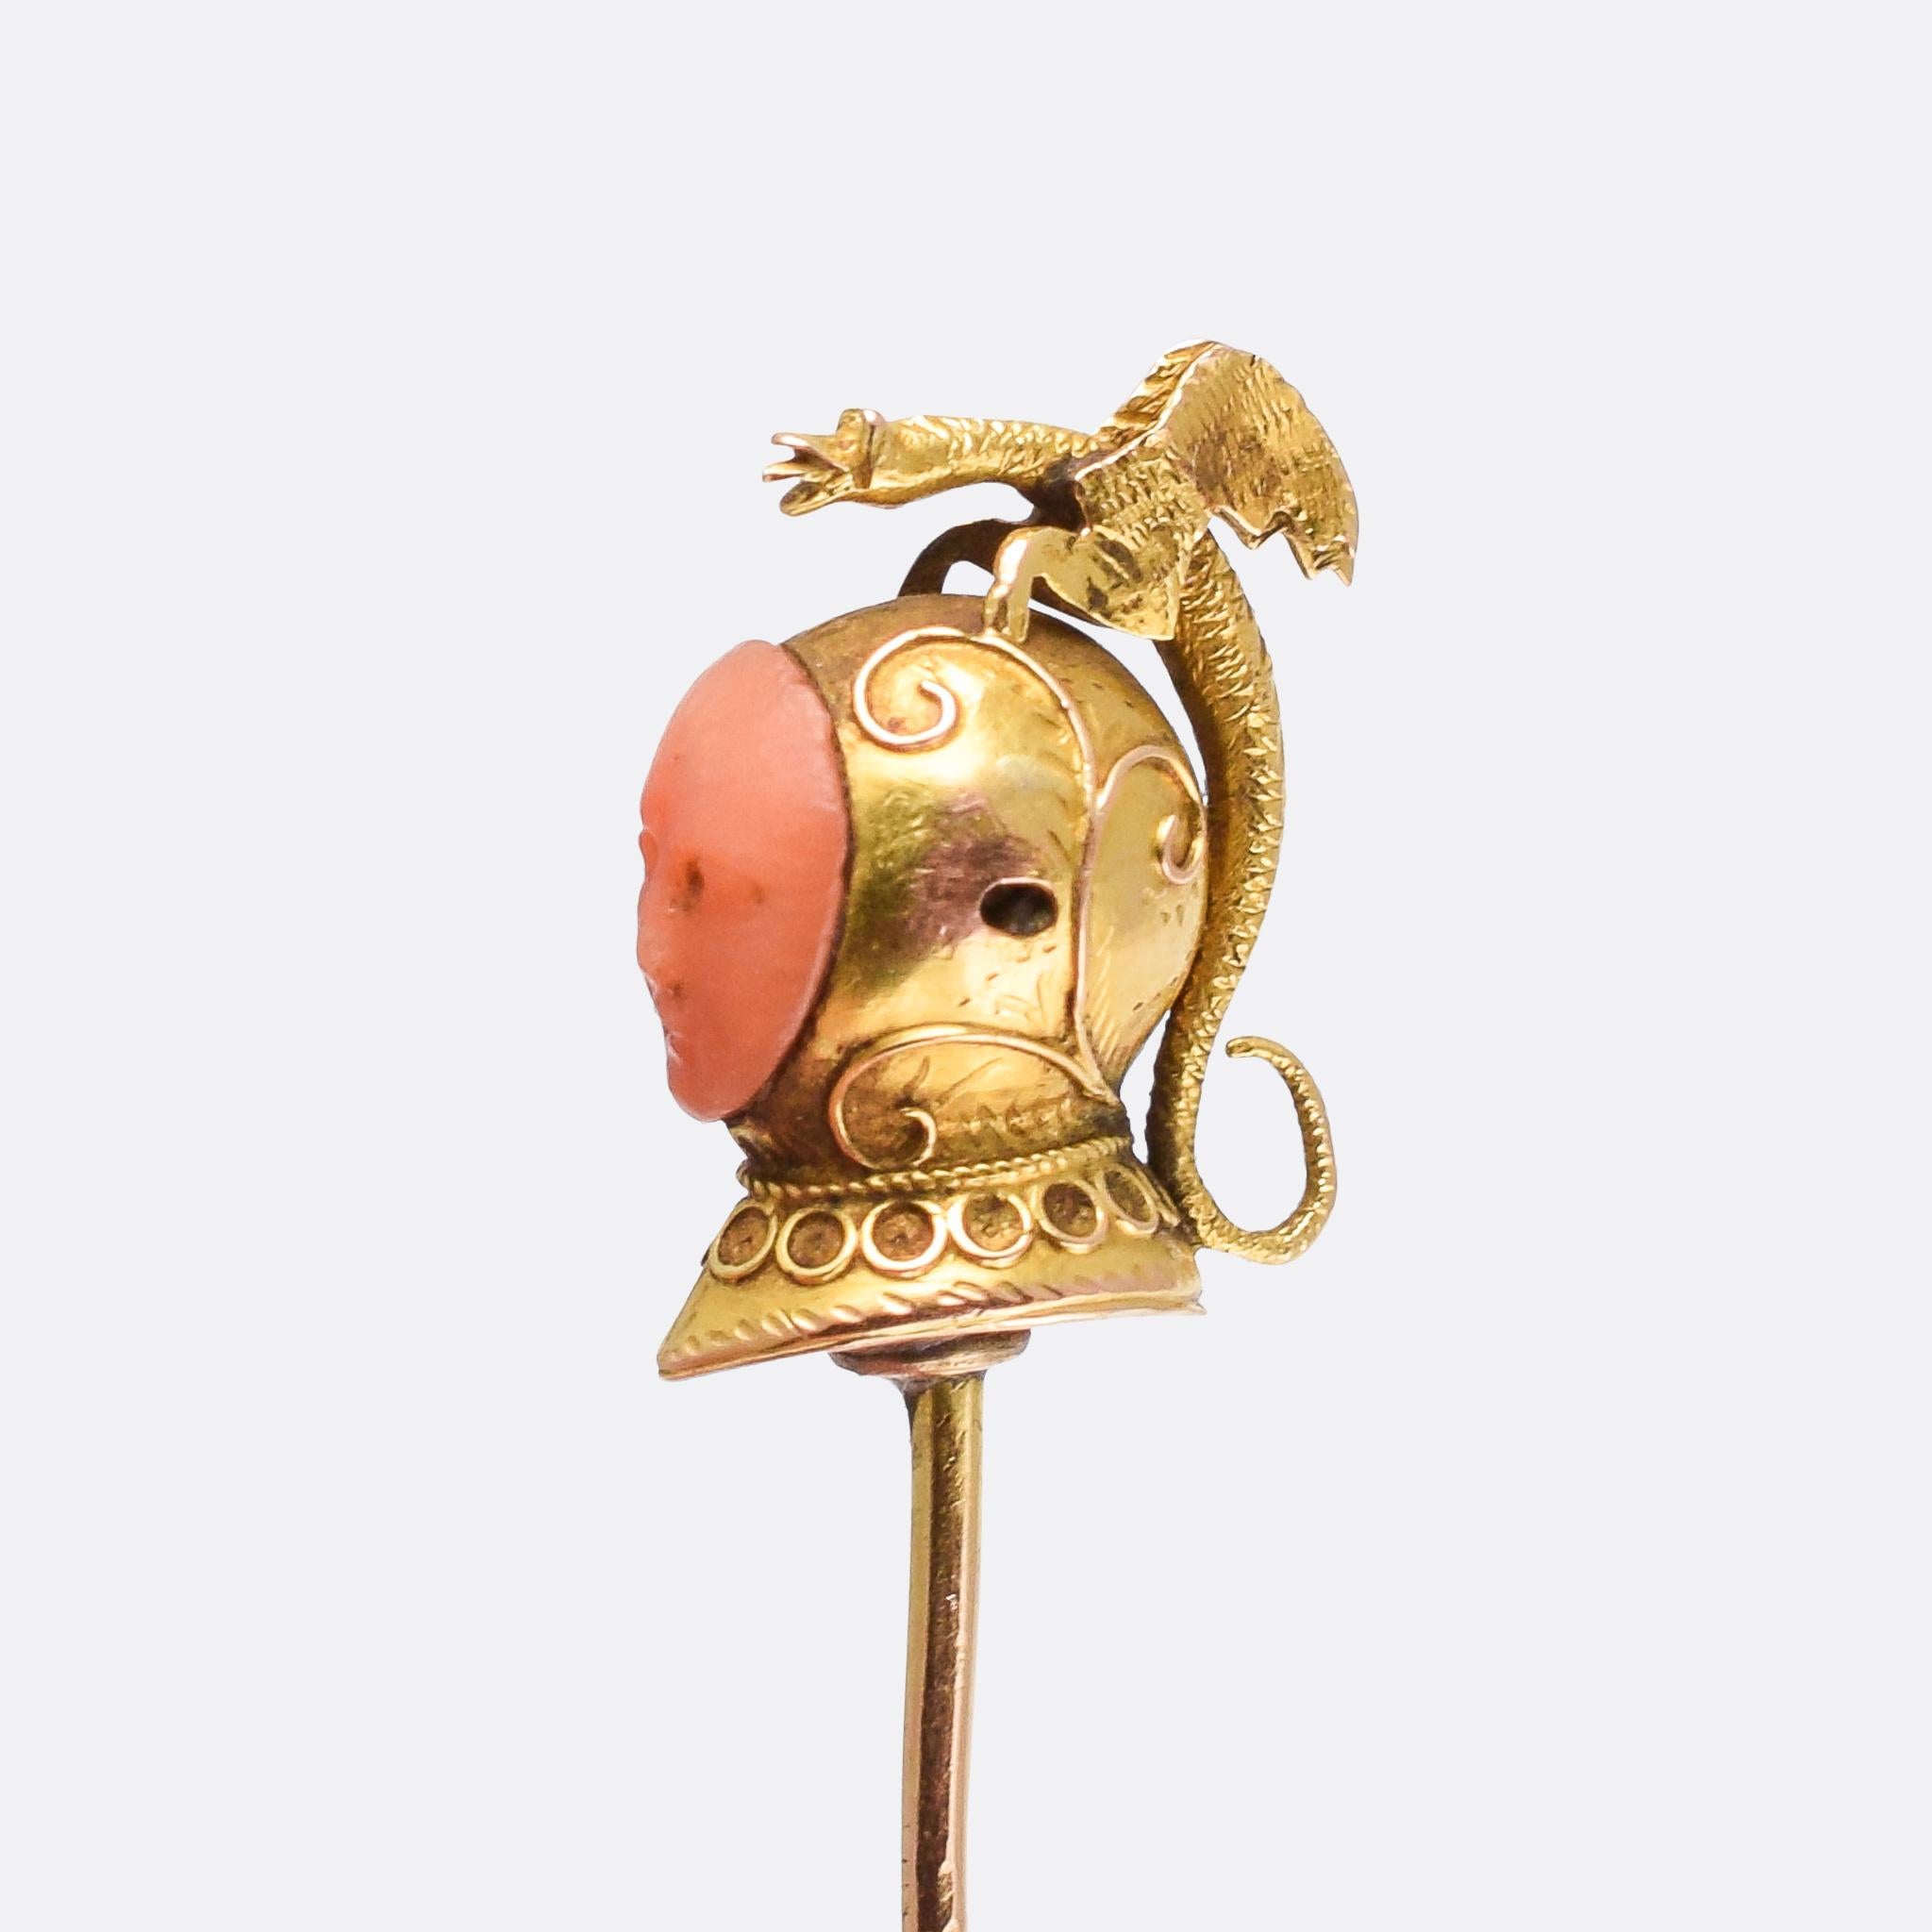 A remarkable antique stick pin modelled as a Knight’s Helm, complete with carved coral face and decorated with applied gold motifs. Oh, and did I mention the Dragon perched on top?  It dates from the early Victorian era, circa 1850, modelled in 15